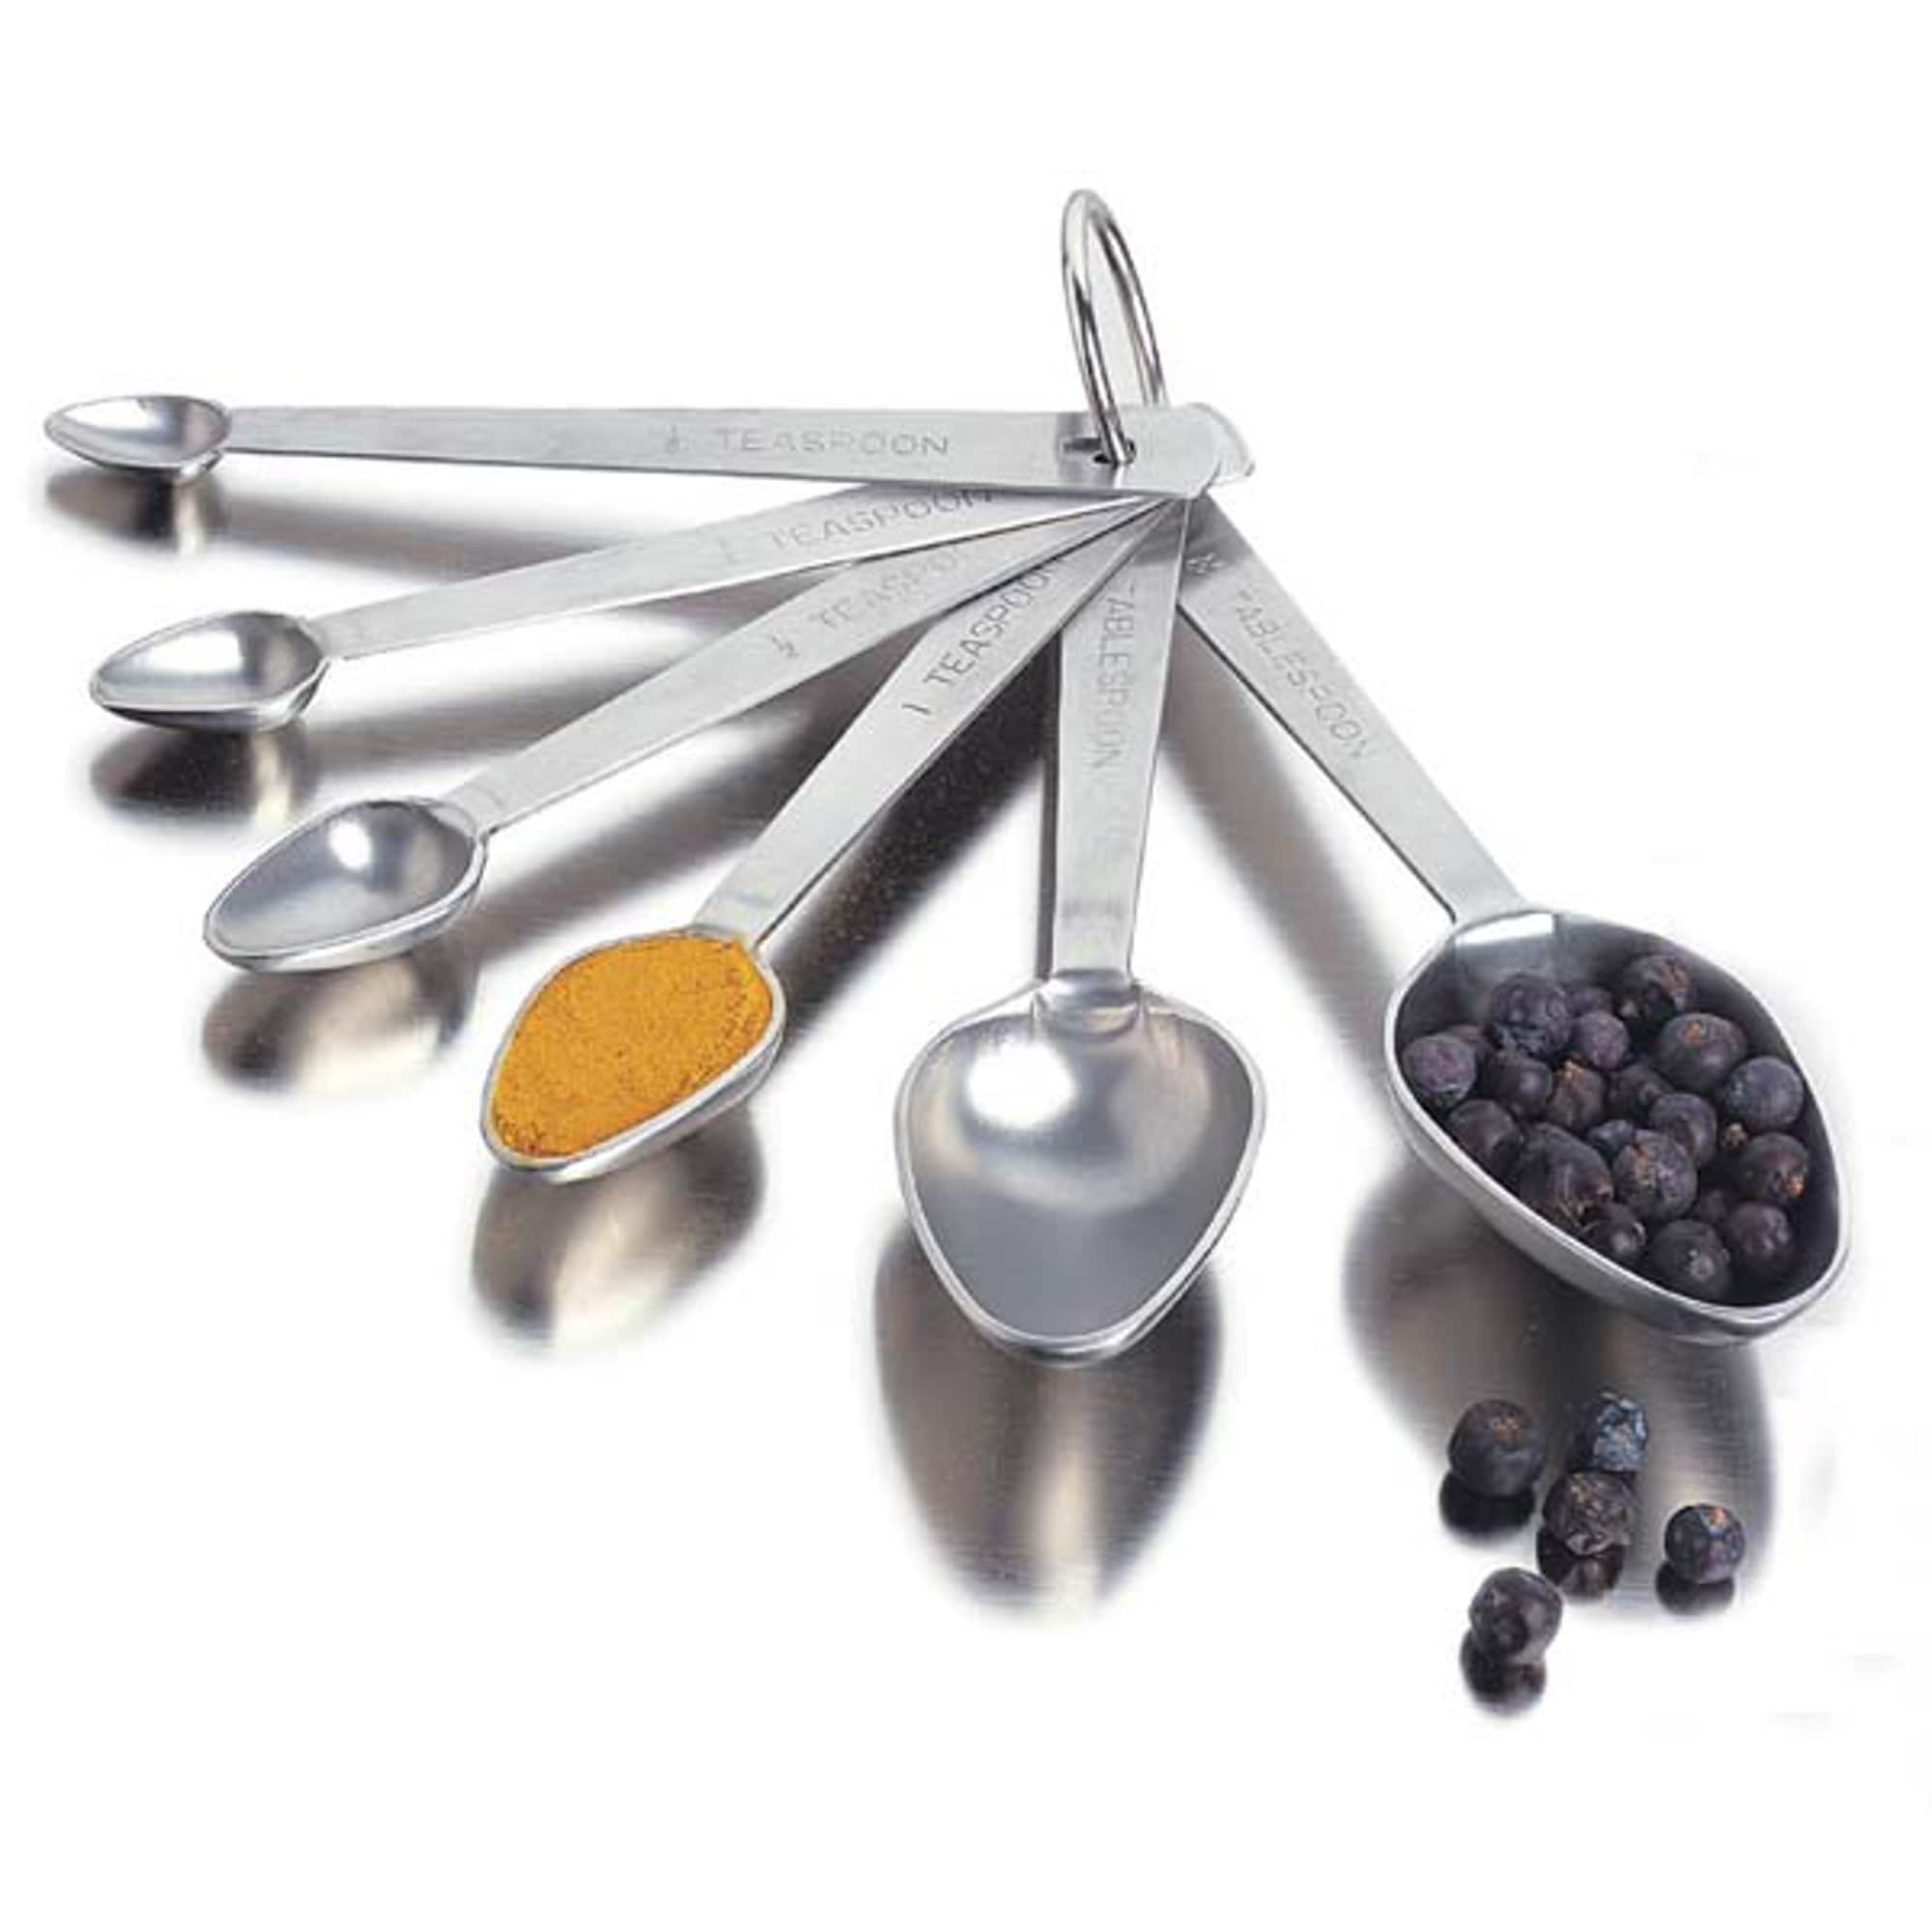 Amco Rust Proof Stainless Steel Set of 6 Measuring Spoons Silver Hanging